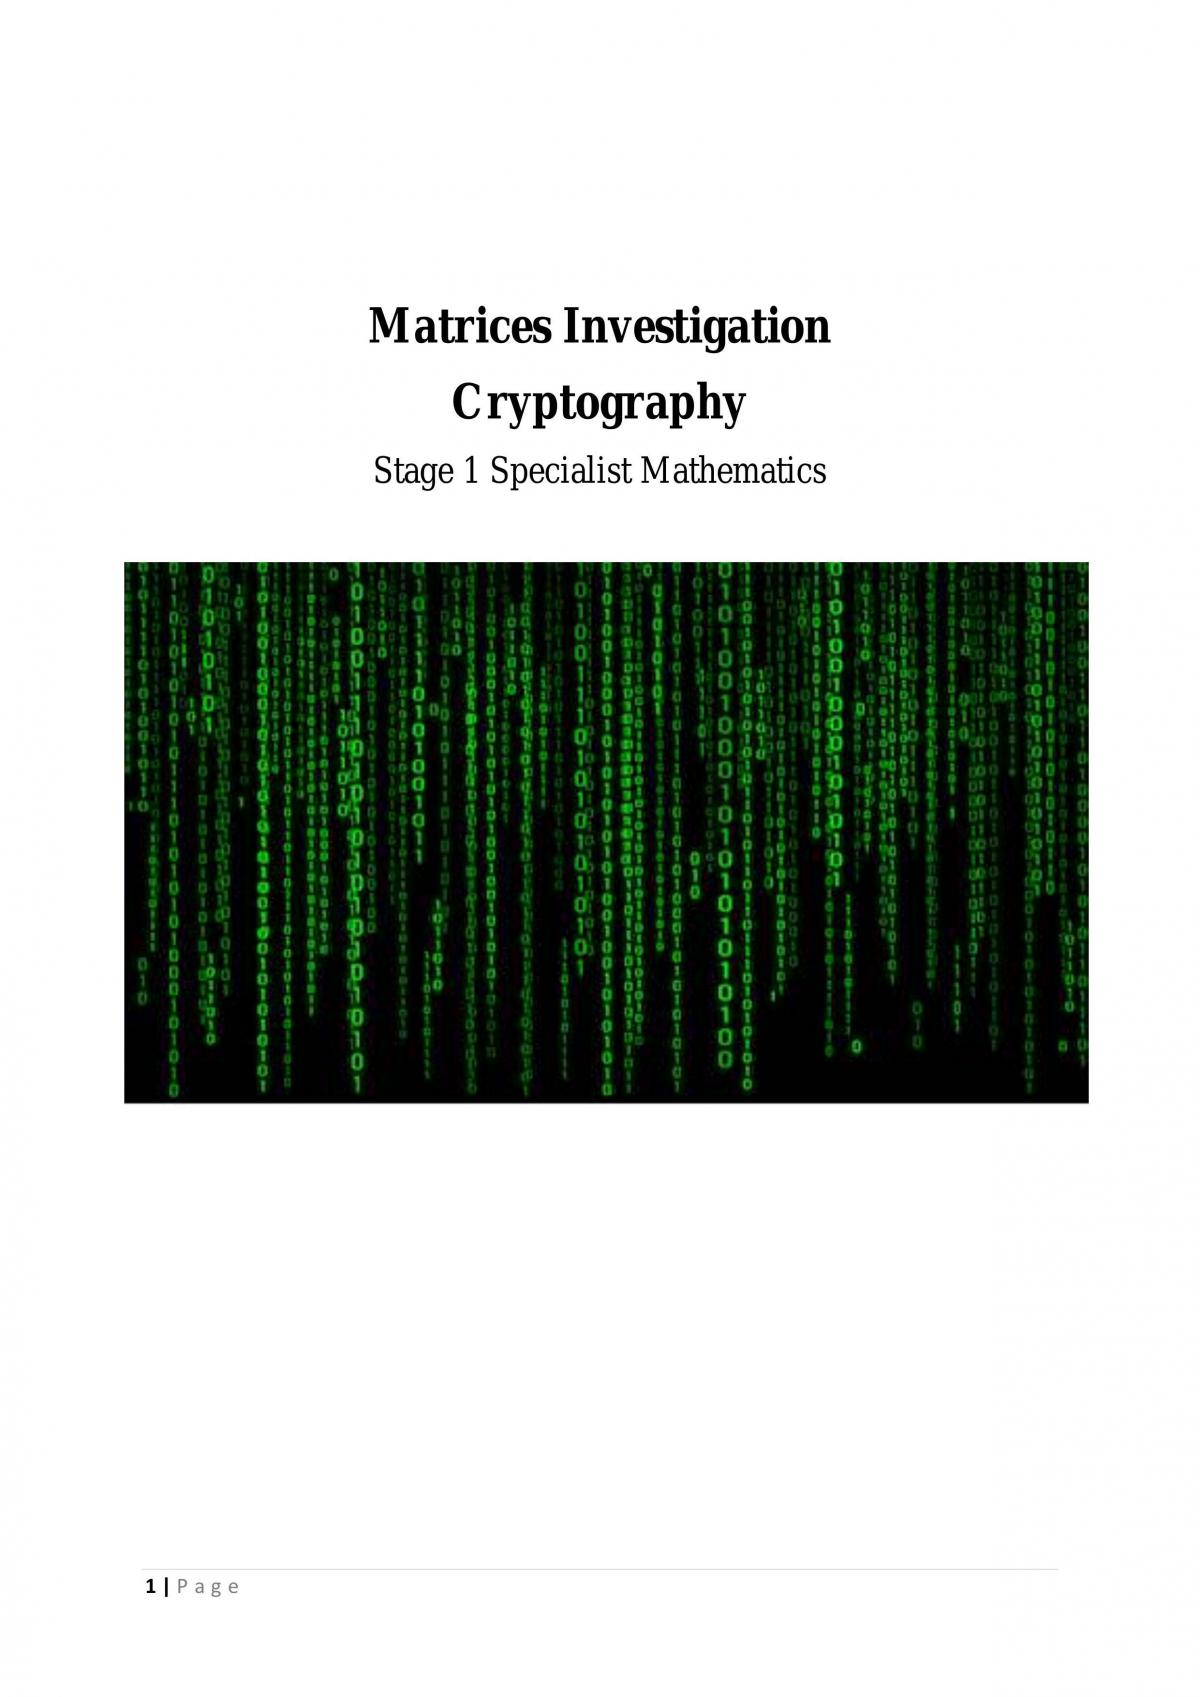 Cryptography Matrices Investigation - Page 1